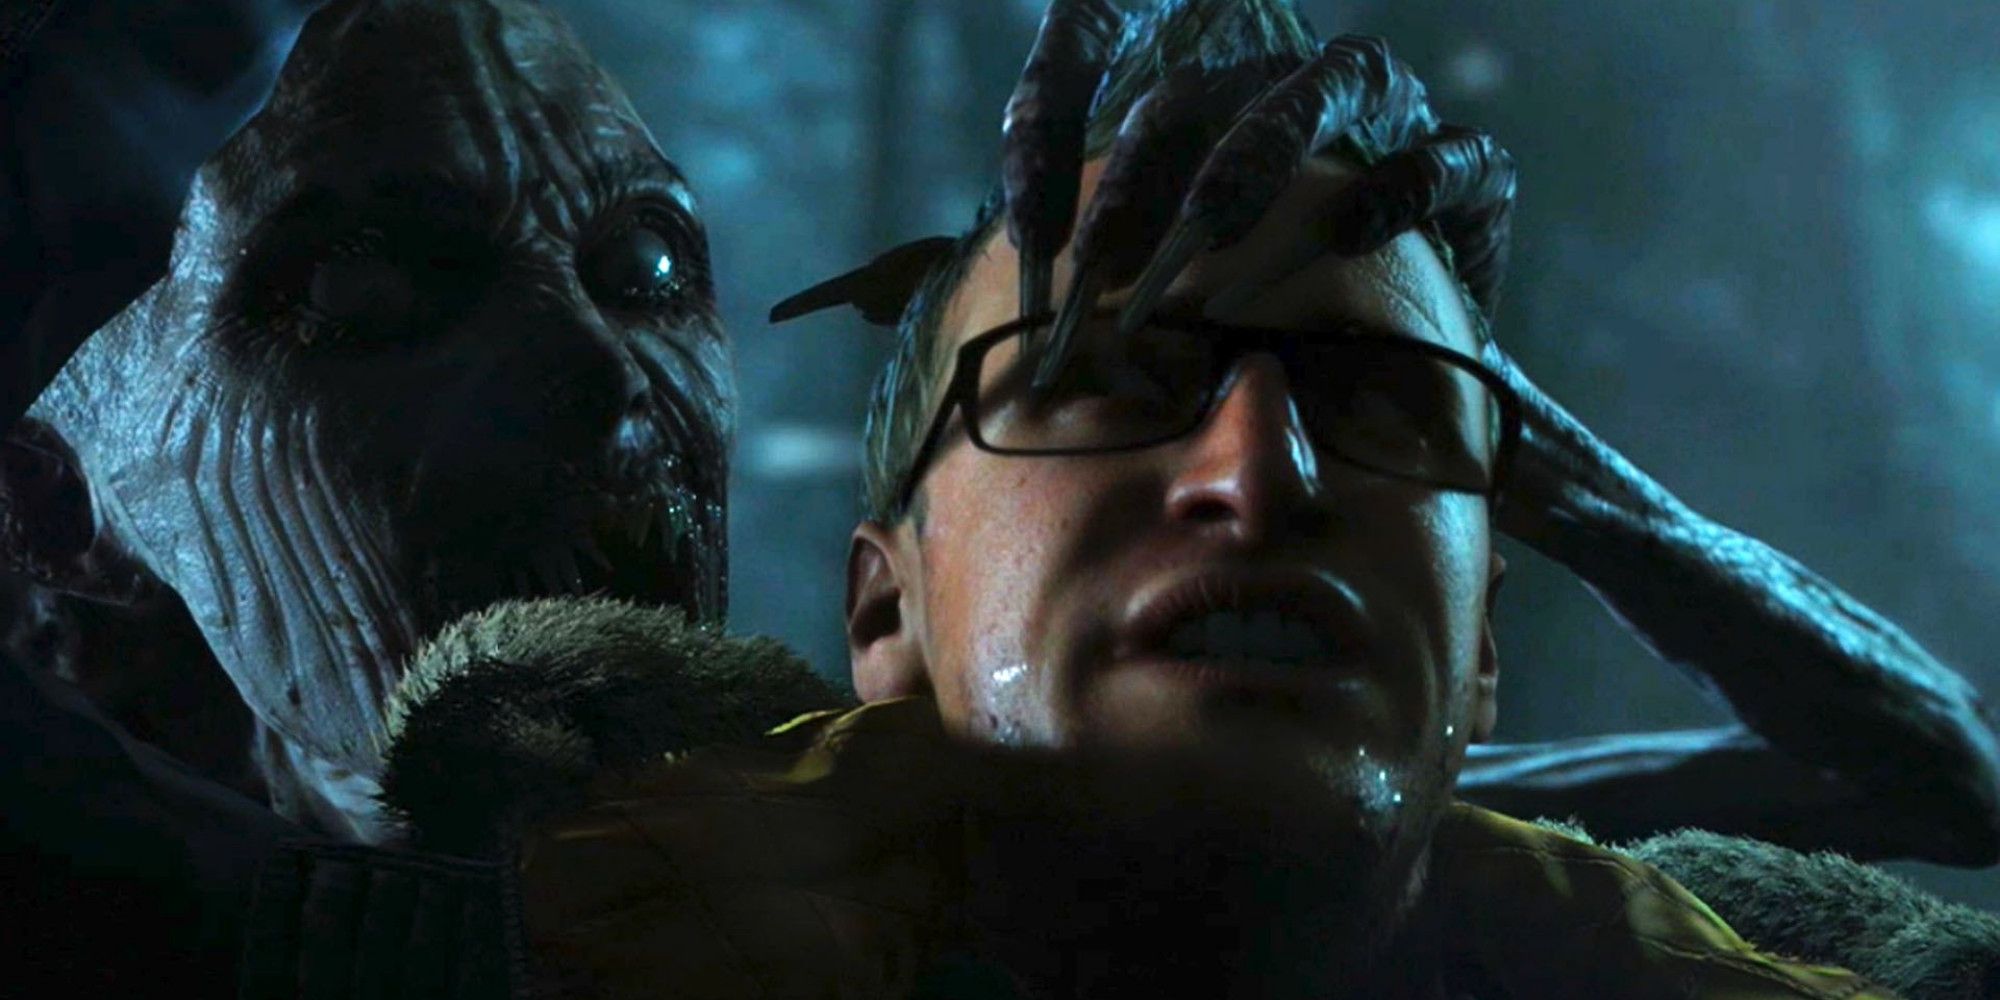 A character from Until Dawn that has been grabbed from behind by a Wendigo